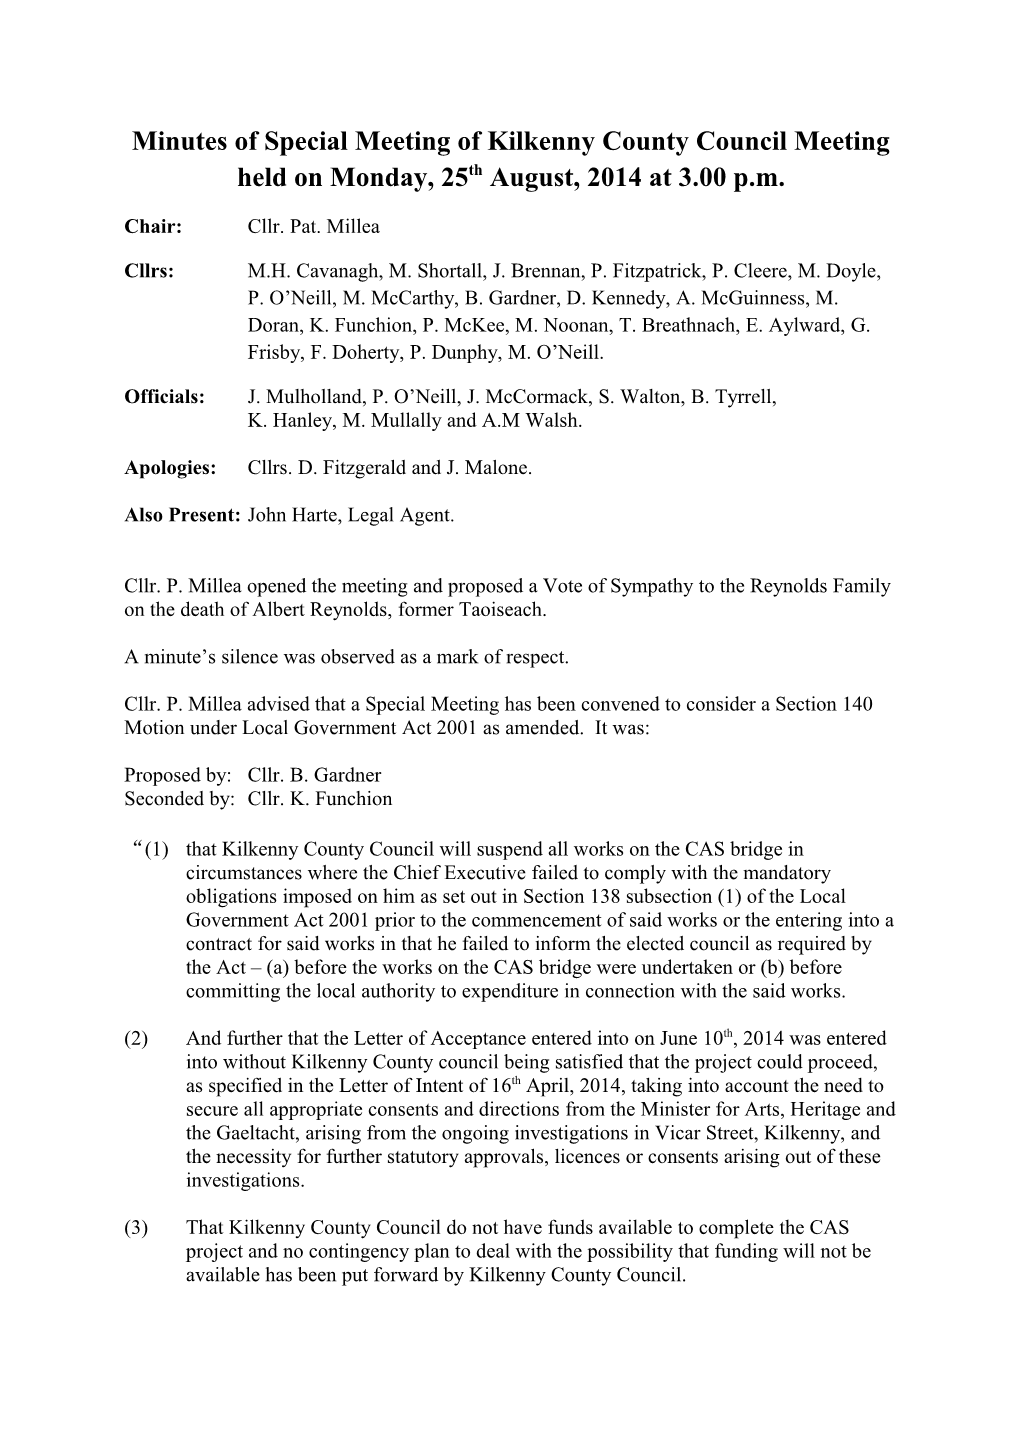 Minutes of Special Meeting of Kilkenny County Council Meeting Held on Monday, 25Th August